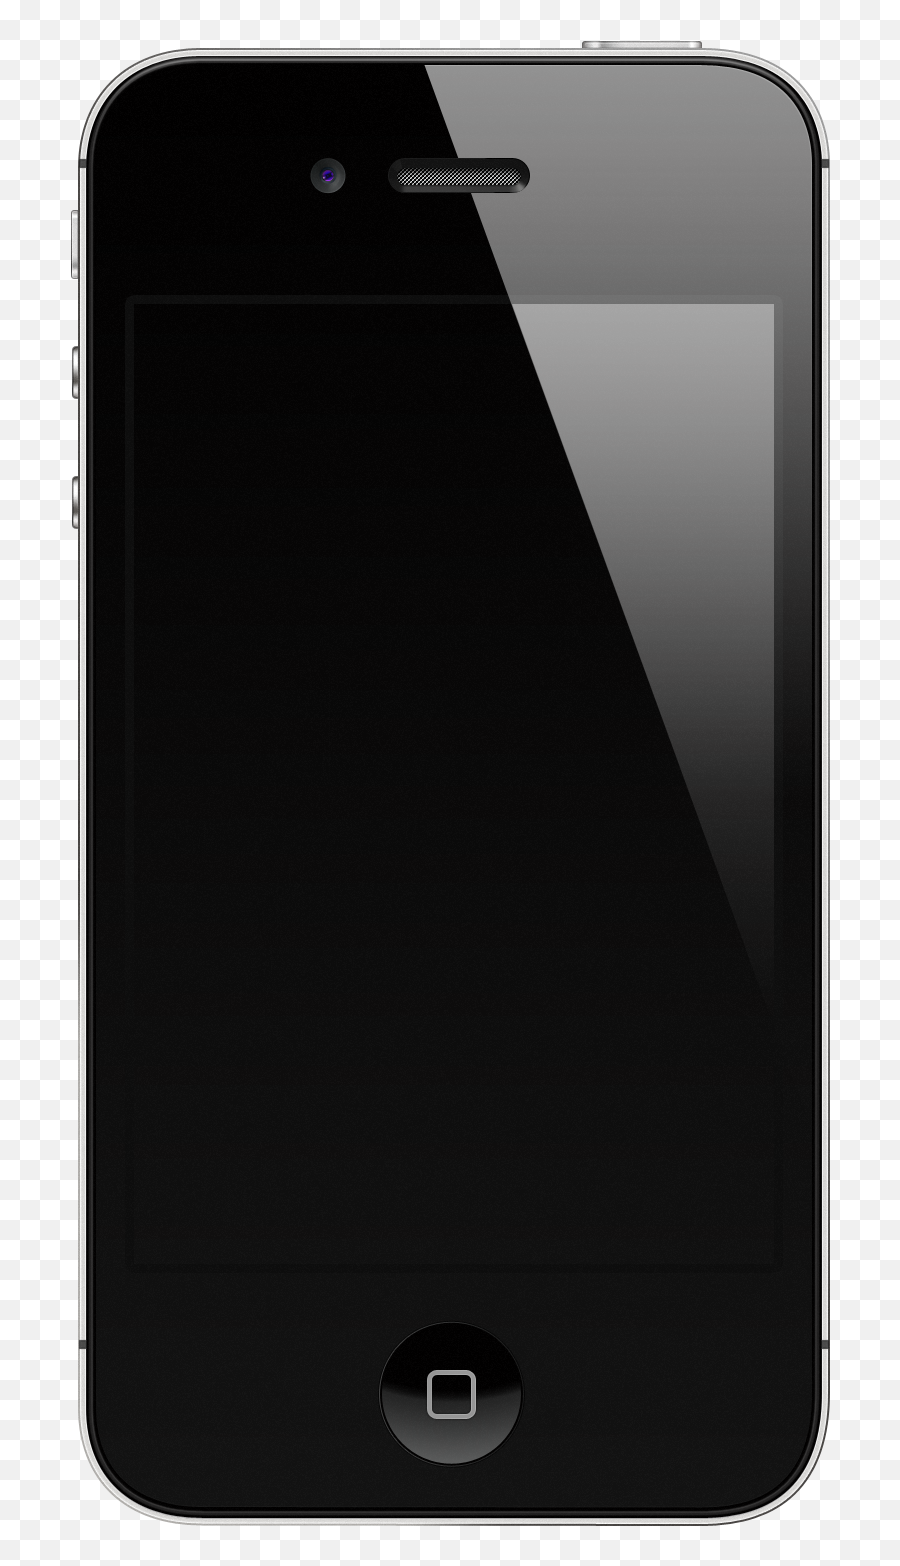 Blank Iphone Screen Transparent U0026 Png Clipart Free Download - Phones With A Black Screen,Iphone Clipart Png